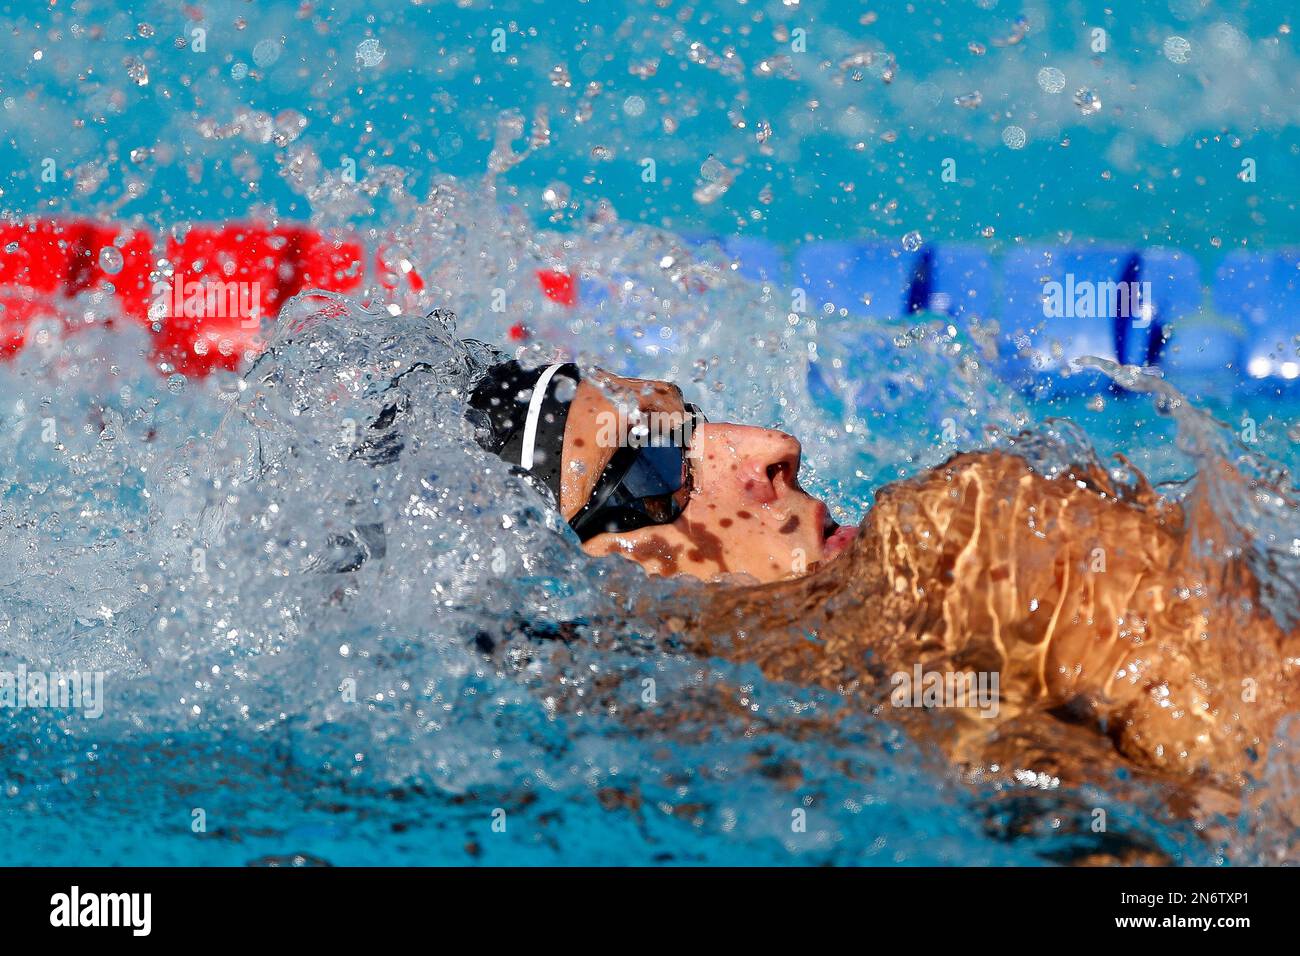 Rome, Italy, 15 August 2022. Ole Braunschweig of Germany competes competes during the LEN European Aquatics Championships 2022 at Stadio del Nuoto in Rome, Italy. August 15, 2022. Credit: Nikola Krstic/Alamy Stock Photo